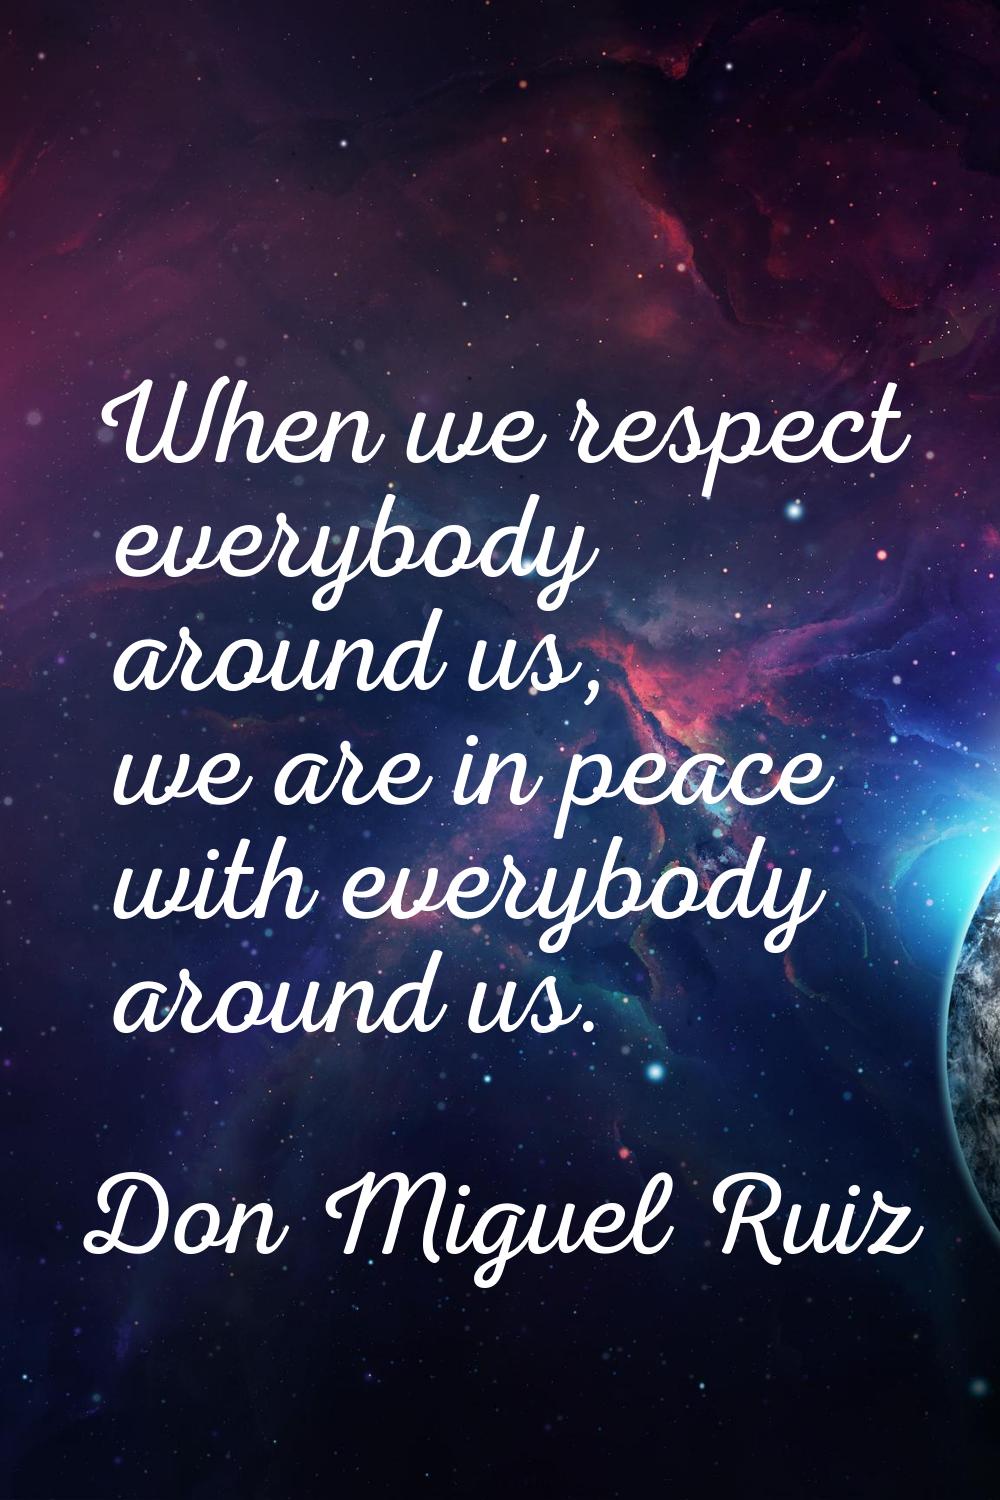 When we respect everybody around us, we are in peace with everybody around us.